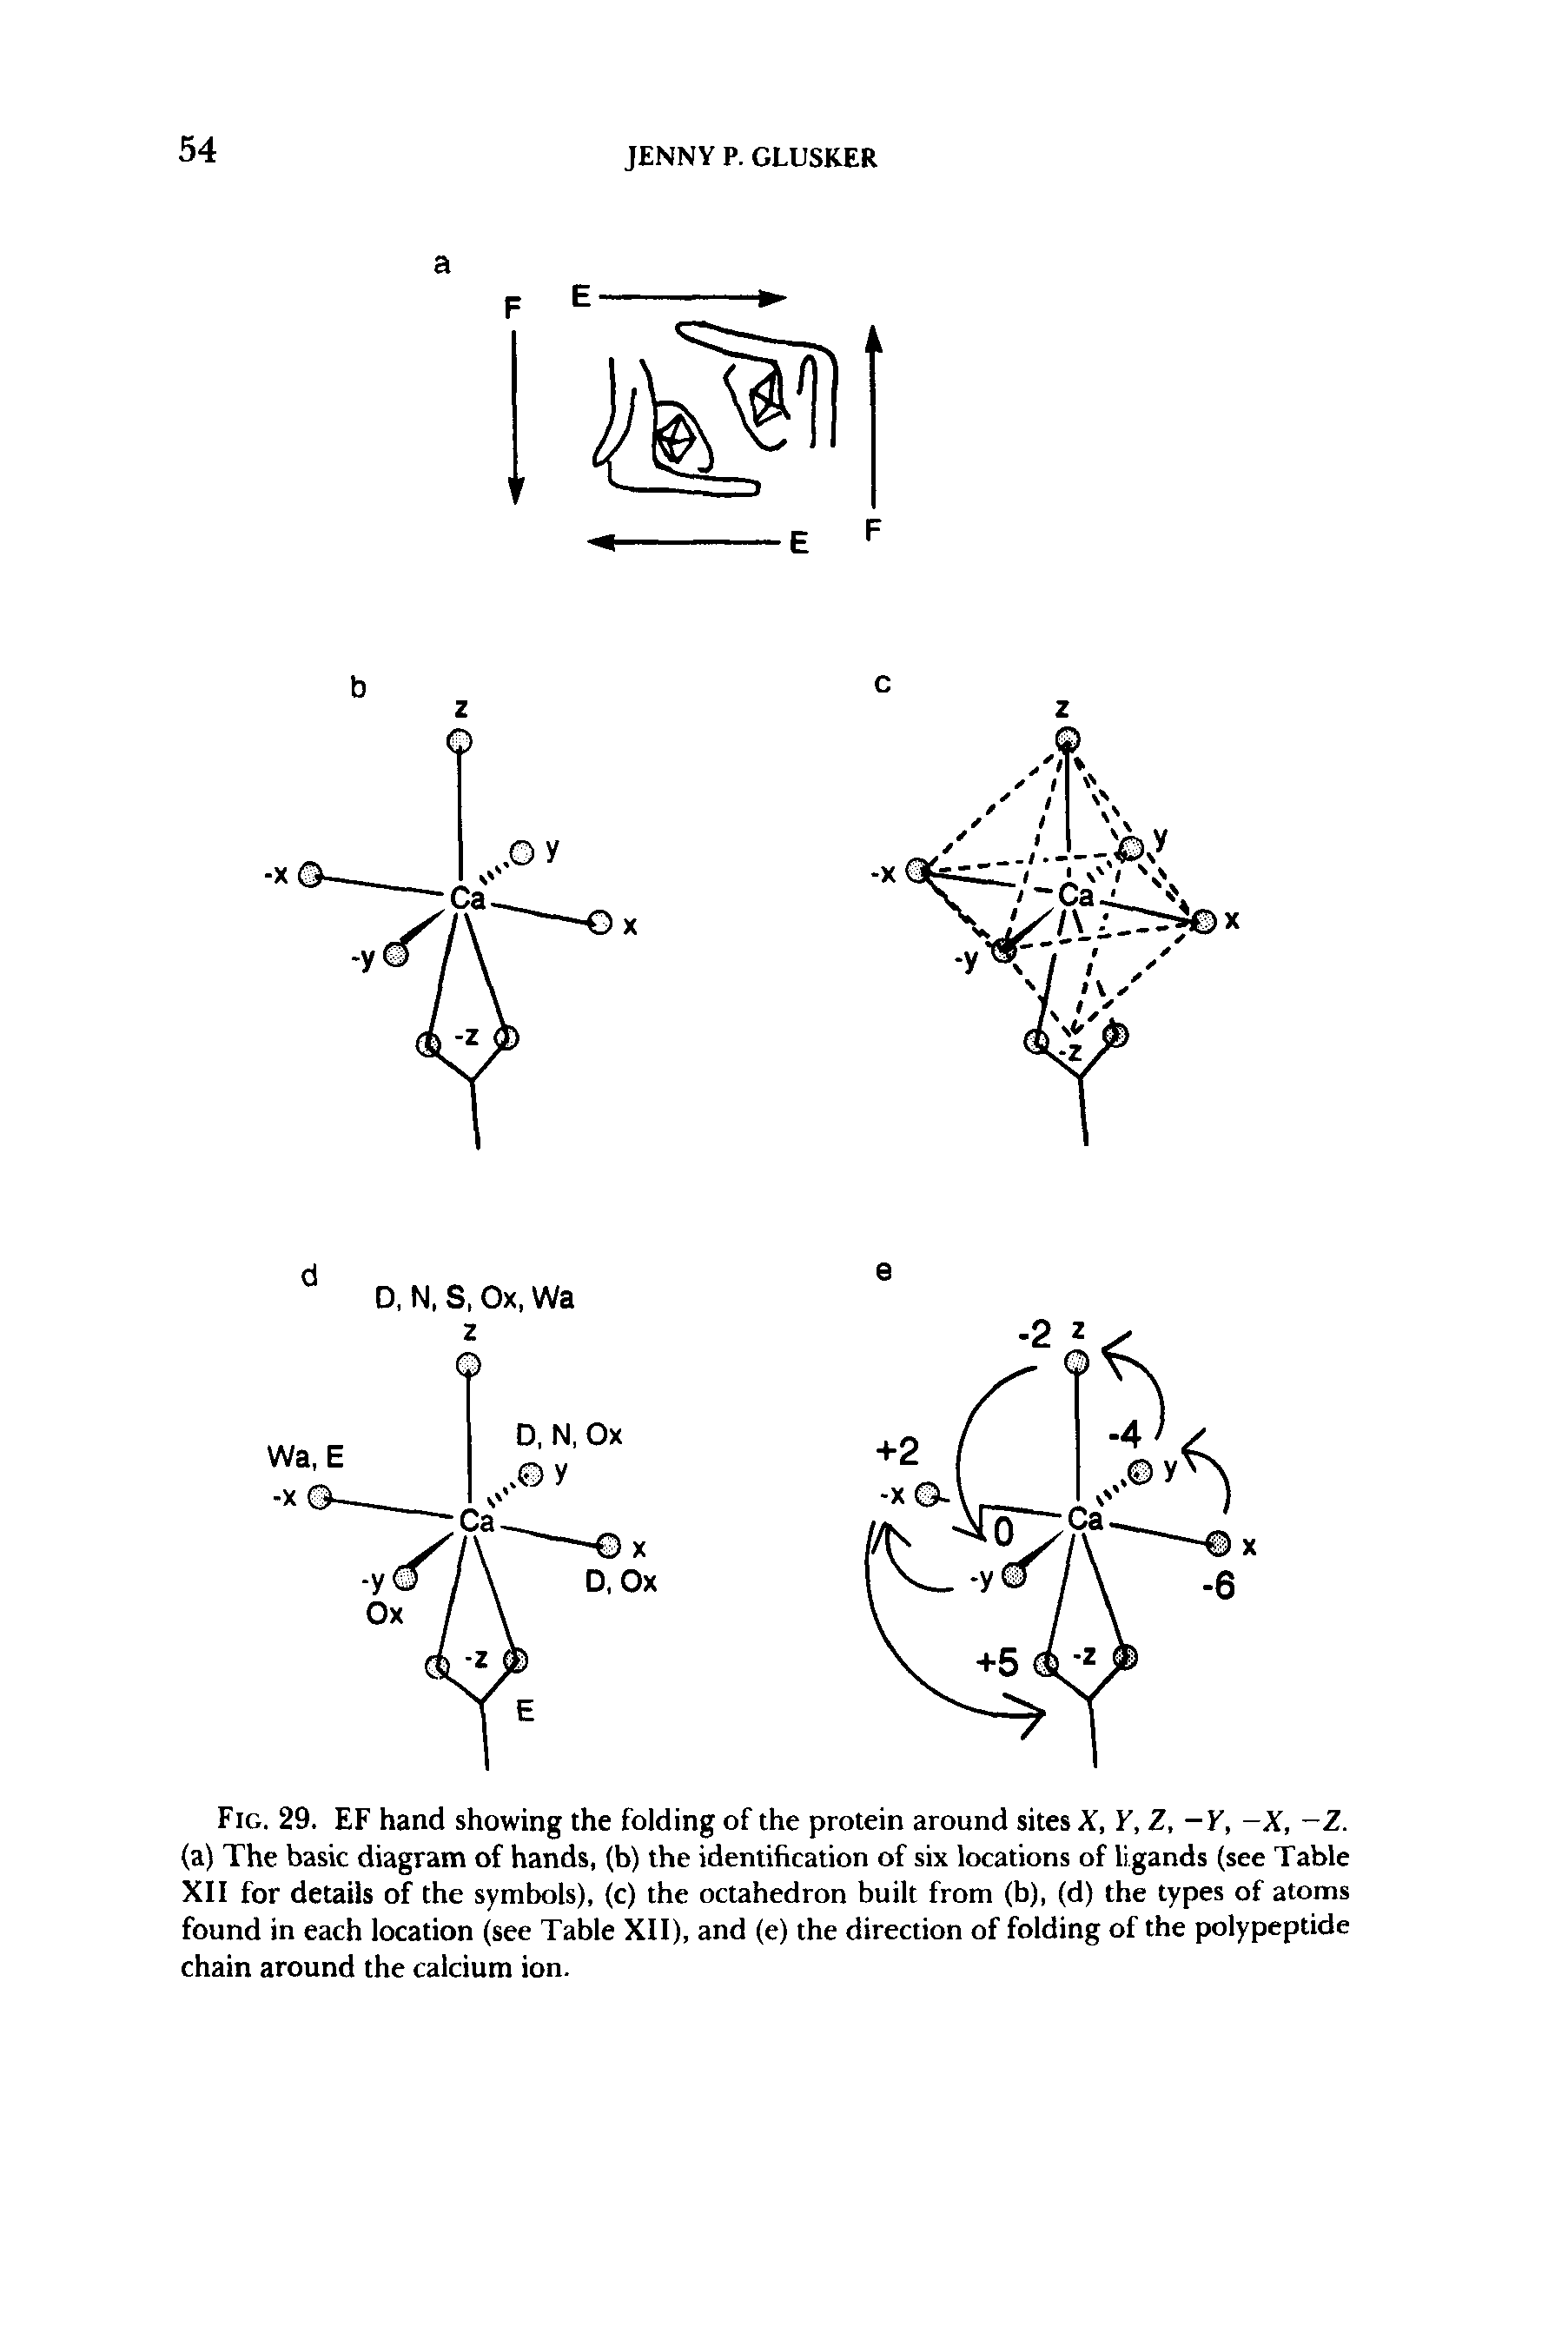 Fig. 29. EF hand showing the folding of the protein around sites X, Y, Z, - Y, -X, -Z. (a) The basic diagram of hands, (b) the identification of six locations of ligands (see Table XII for details of the symbols), (c) the octahedron built from (b), (d) the types of atoms found in each location (see Table XII), and (e) the direction of folding of the polypeptide chain around the calcium ion.